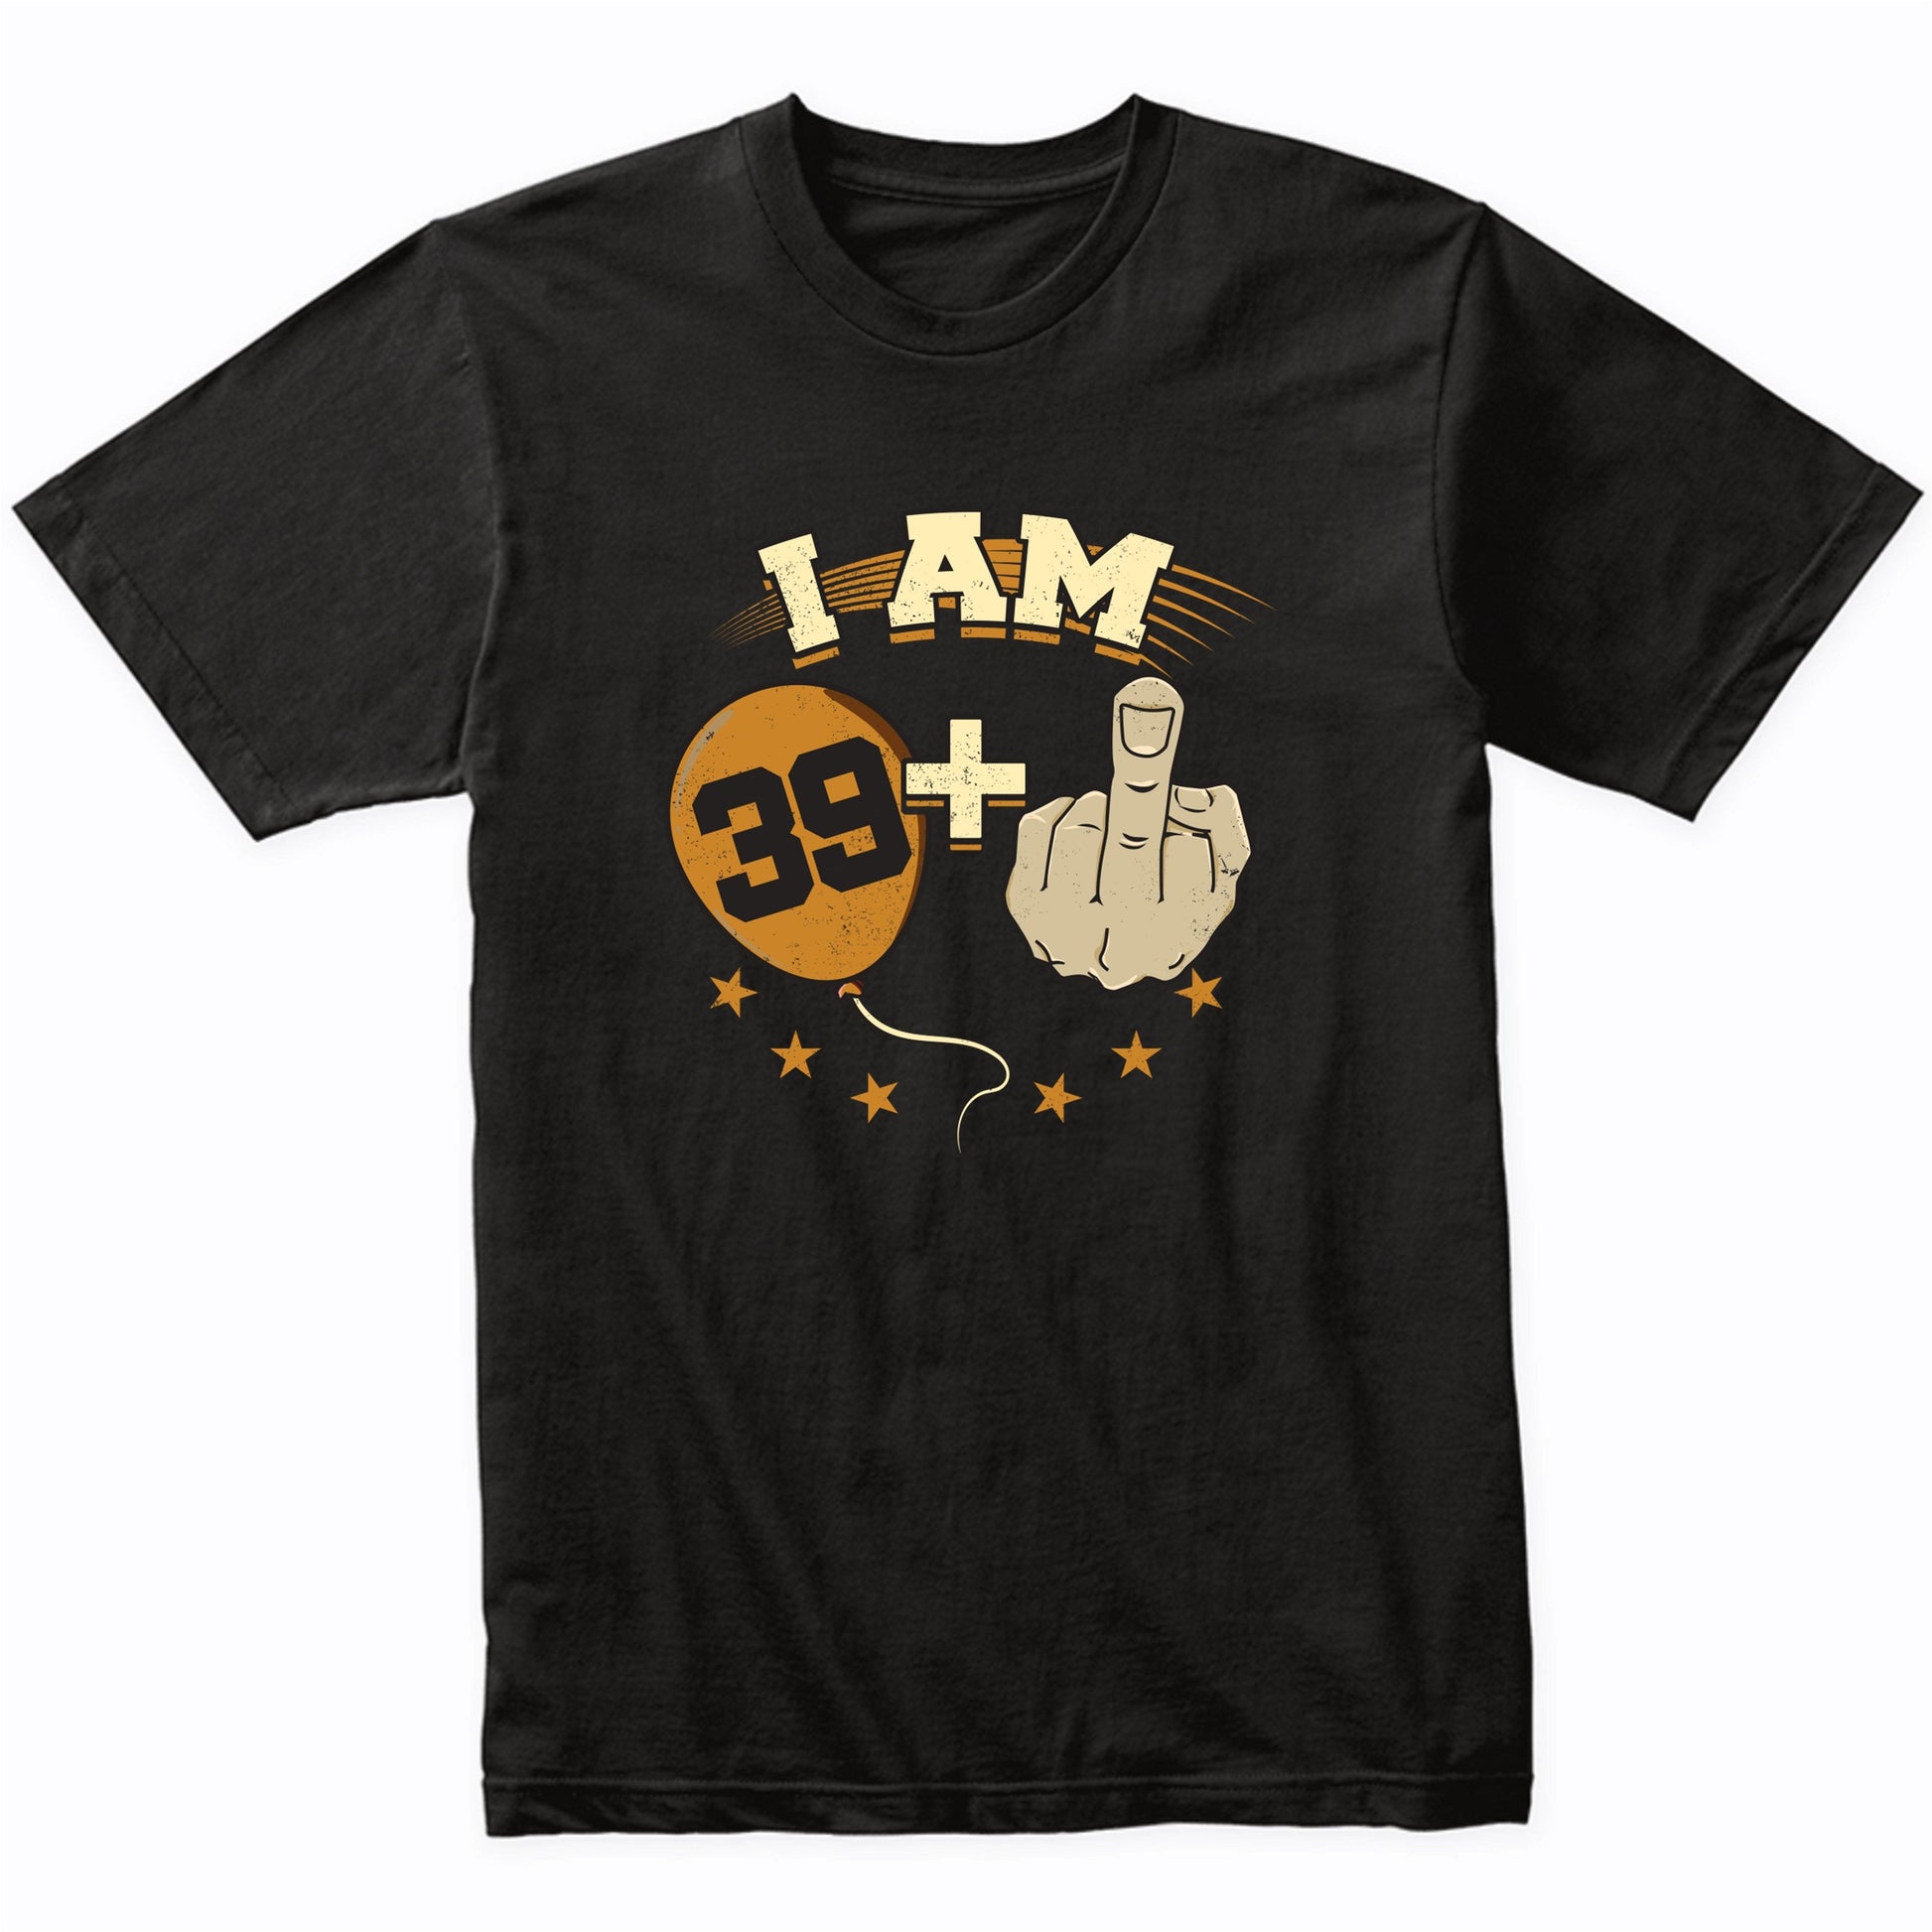 I Am 39 Plus Middle Finger Funny 40th Birthday Party Shirt